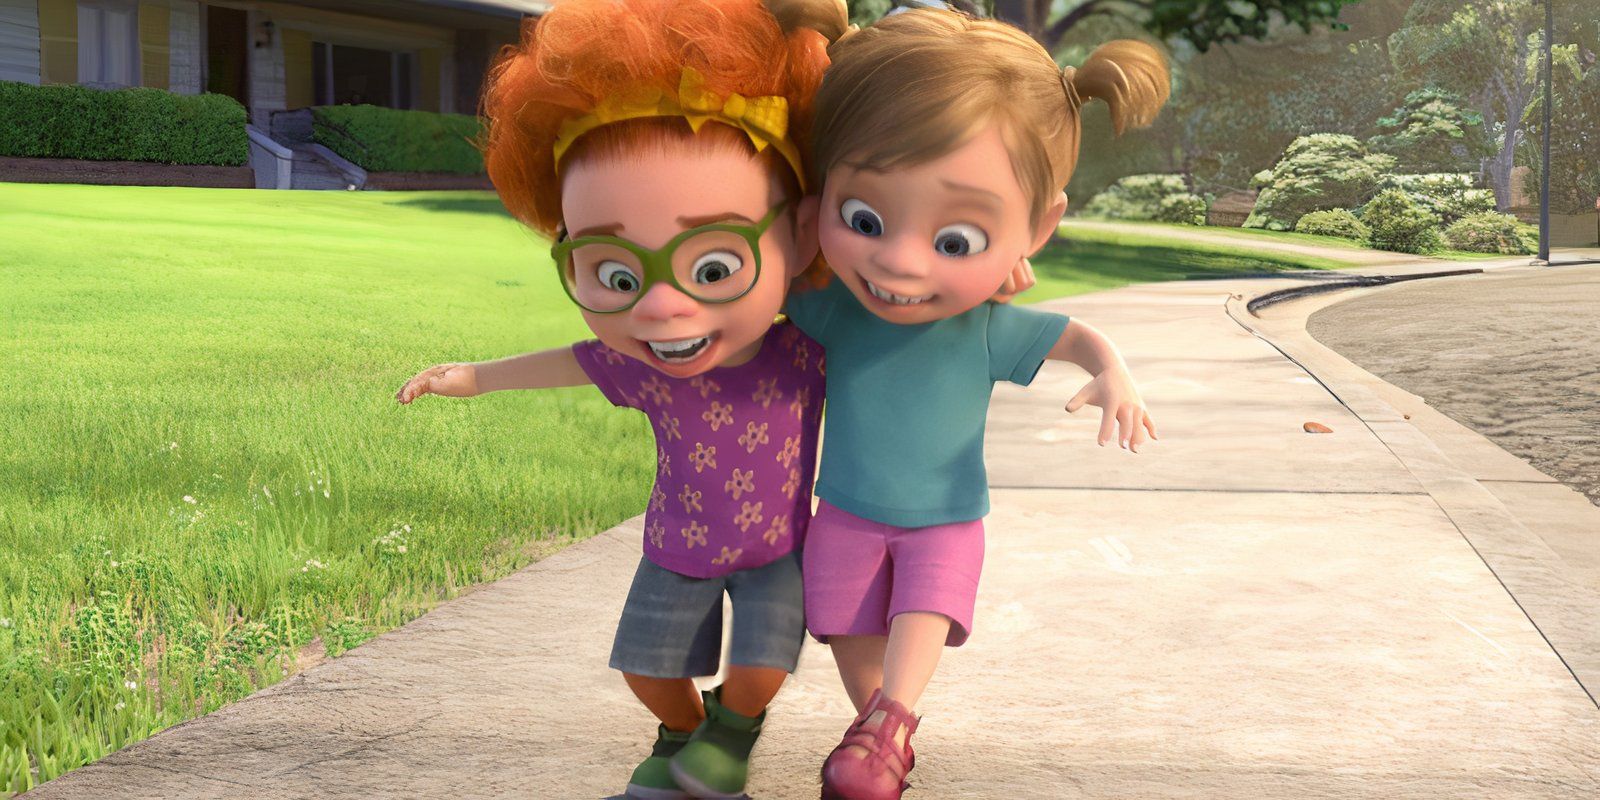 Riley and her friend walk on the sidewalk in Inside Out